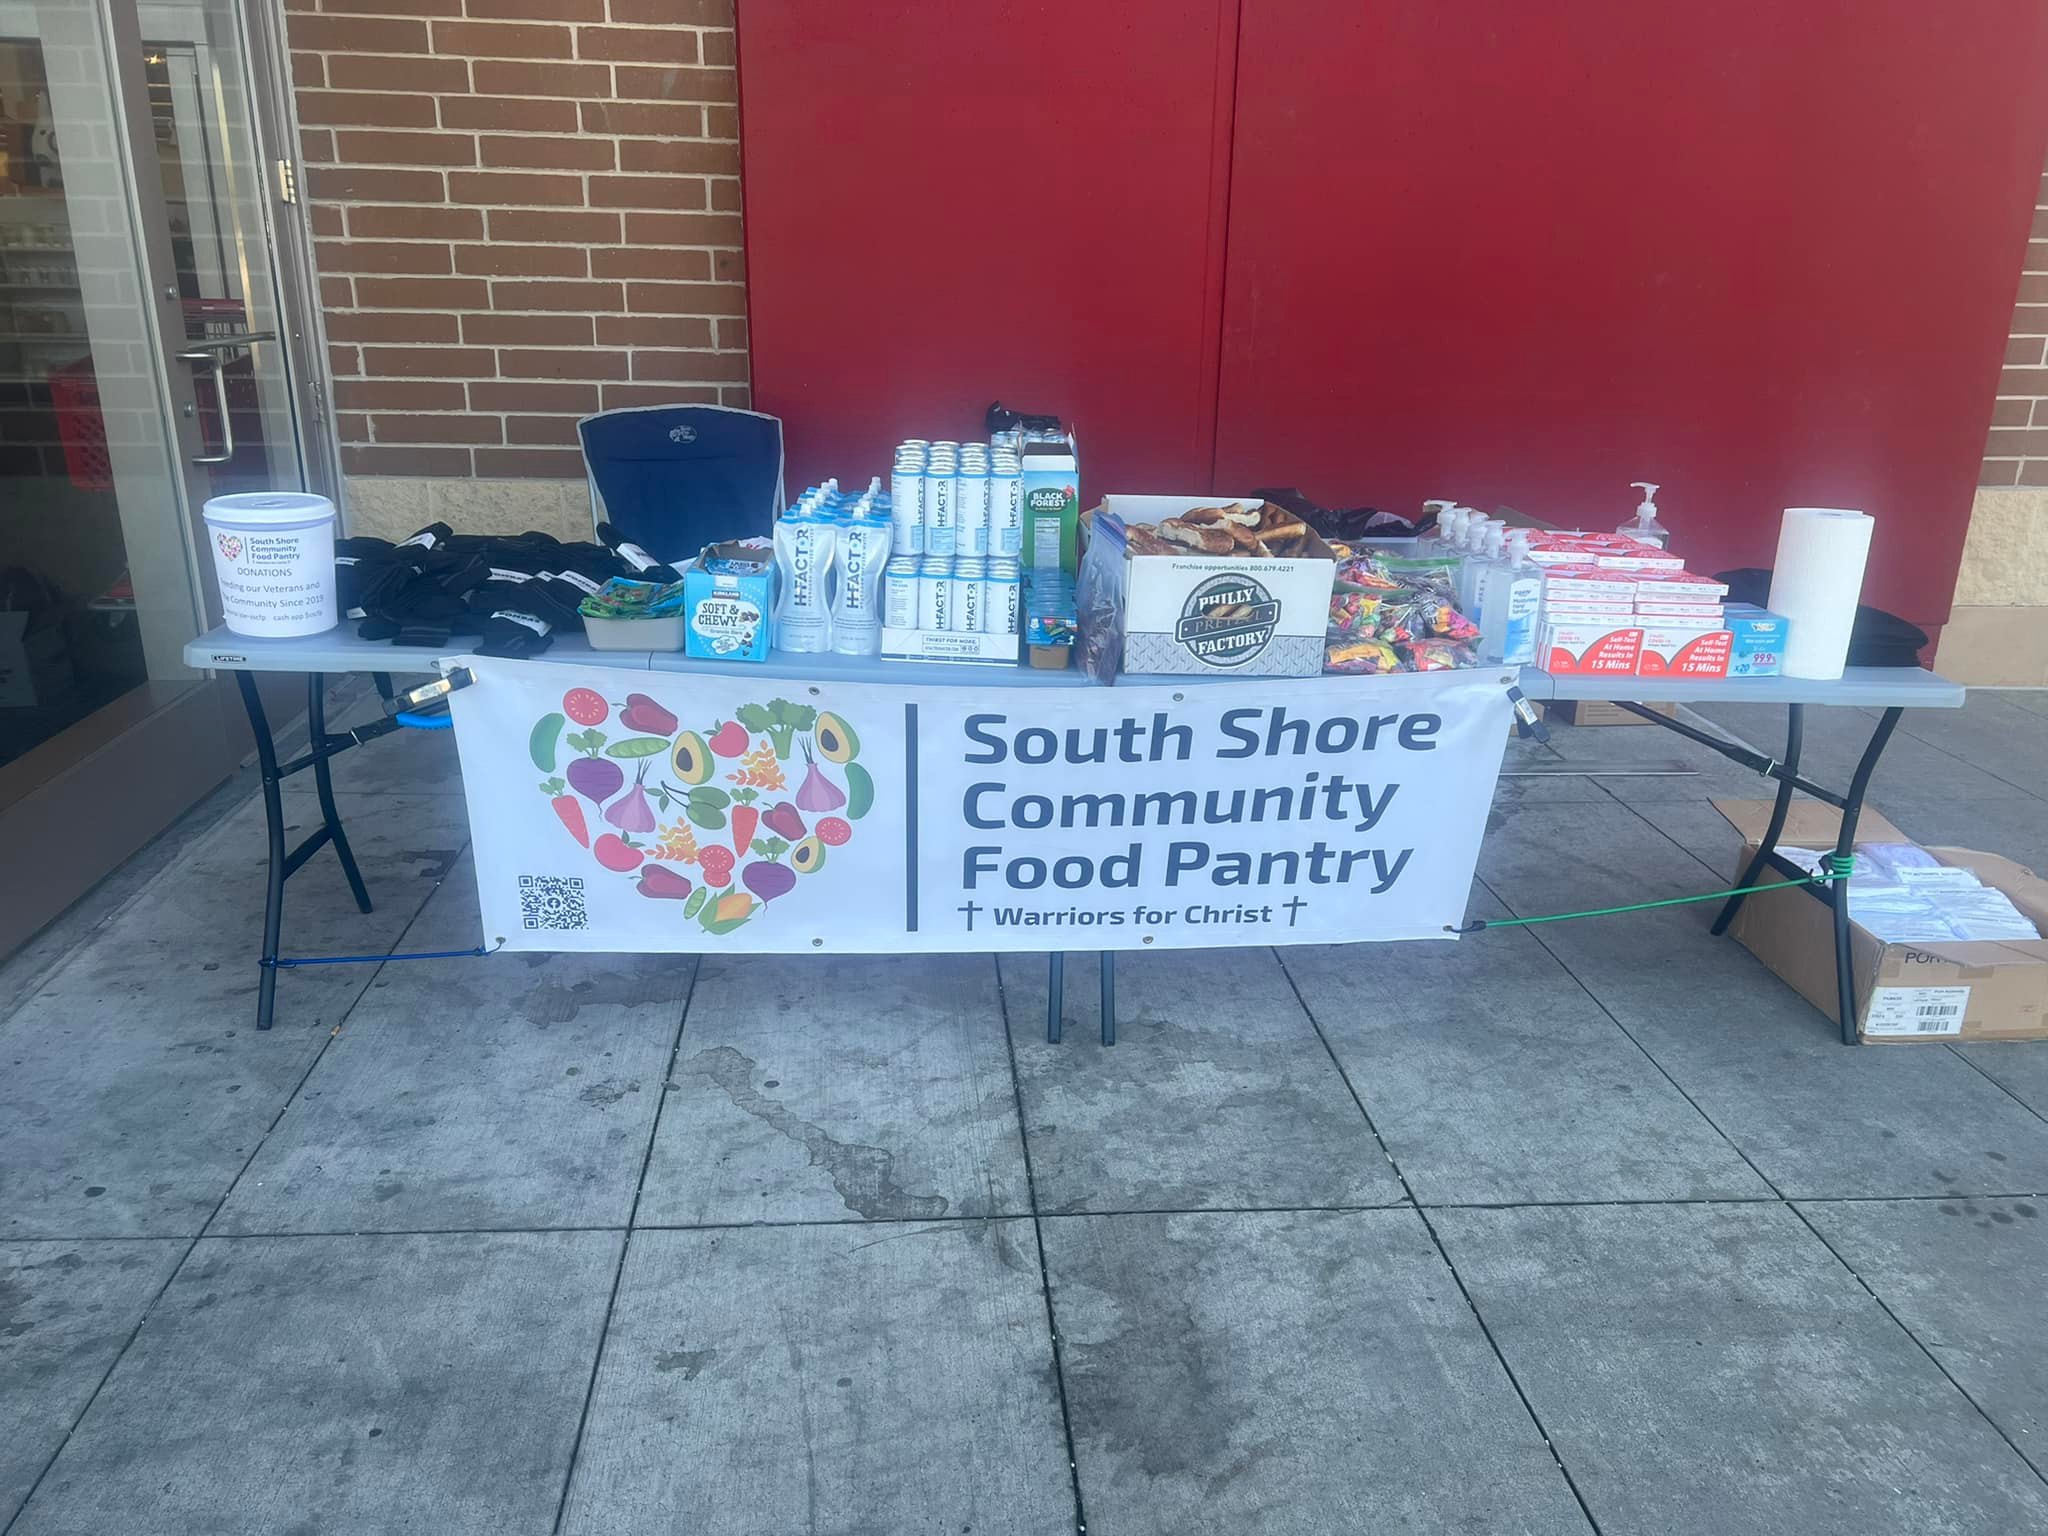 South Shore Community Food Pantry